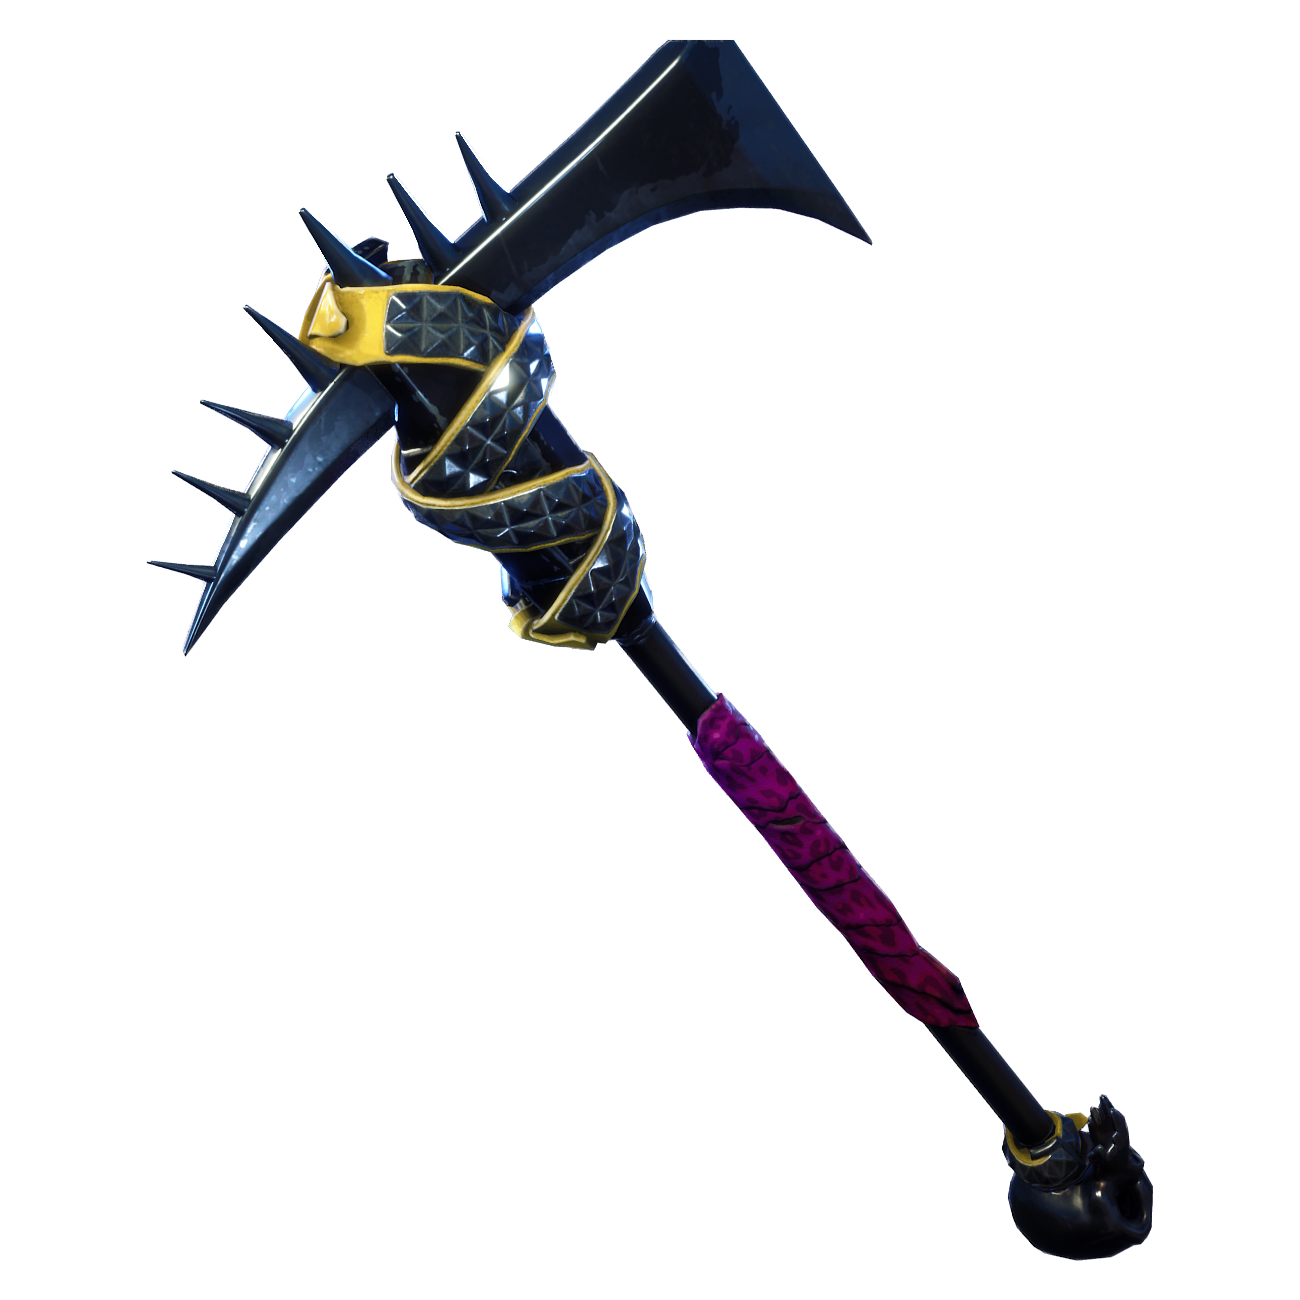 Fortnite Anarchy Axe Png Image Purepng Free Transparent Cc0 Png